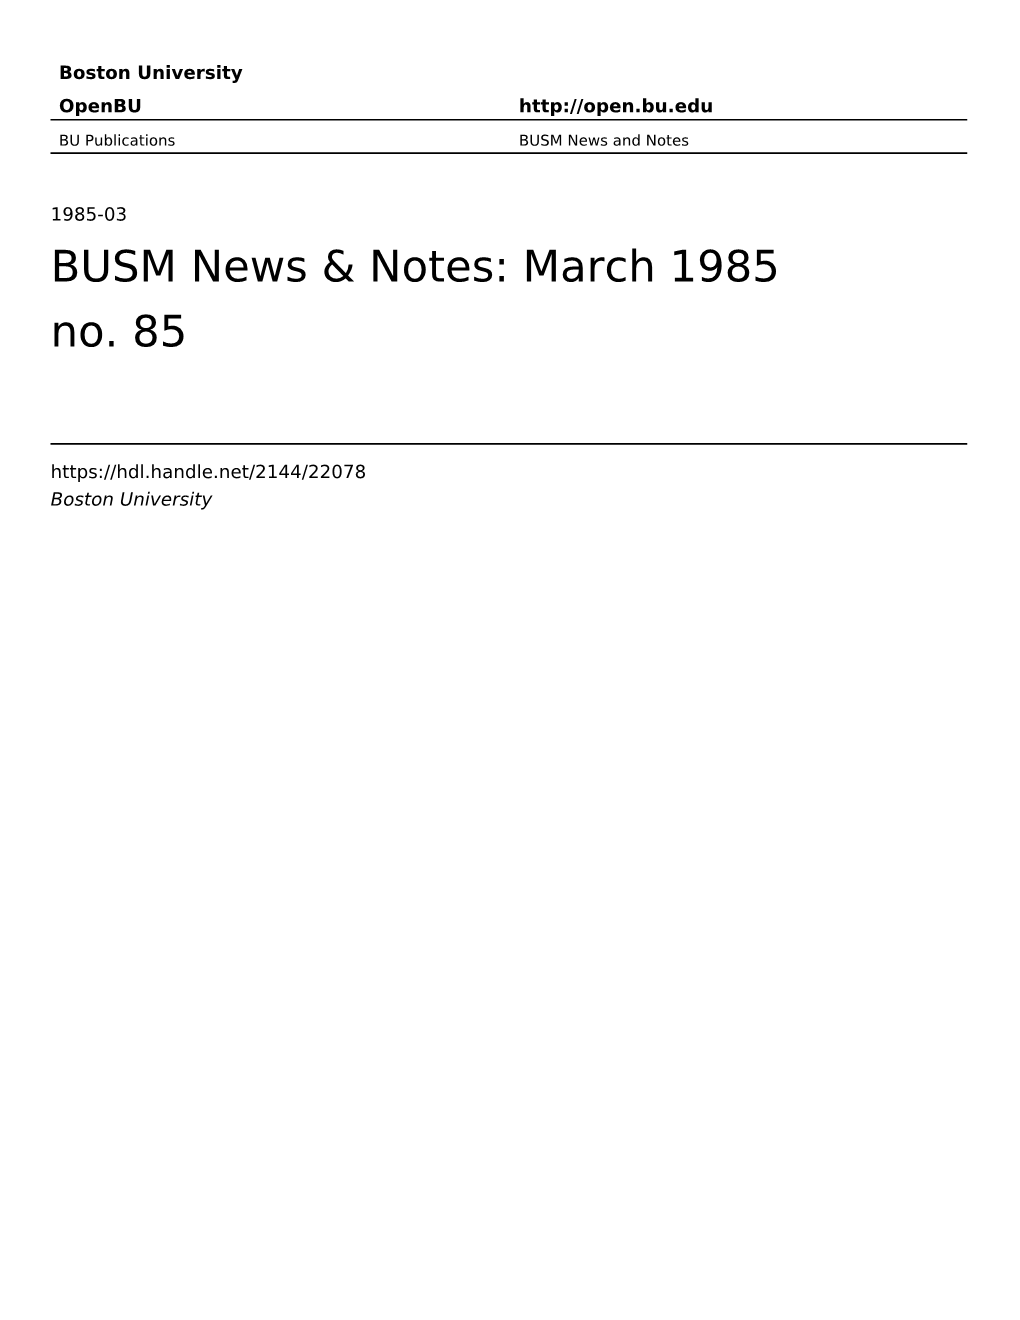 March 1985 No. 85: BUSM News and Notes